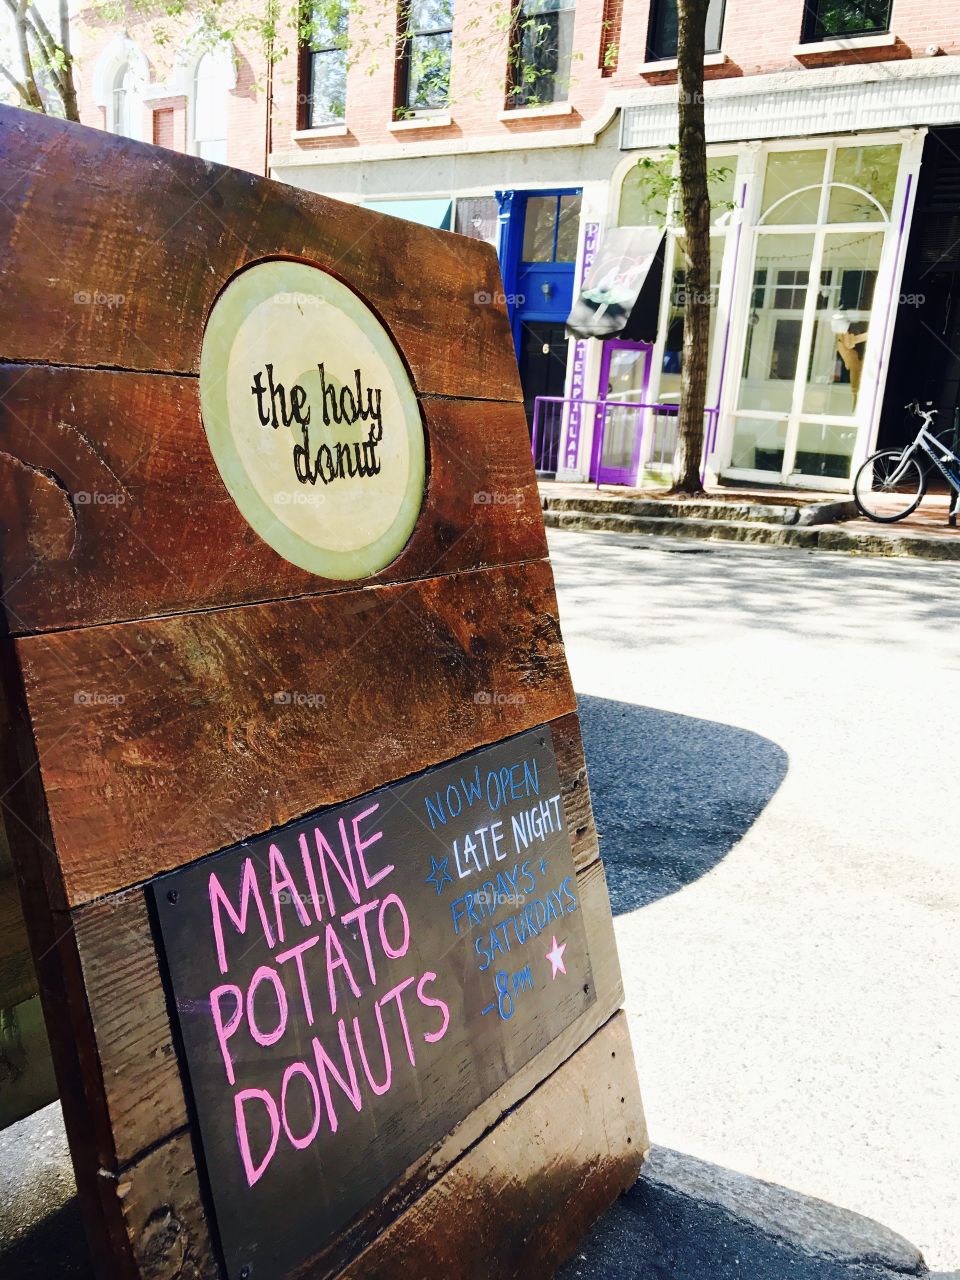 Healthy donuts? Count me in!